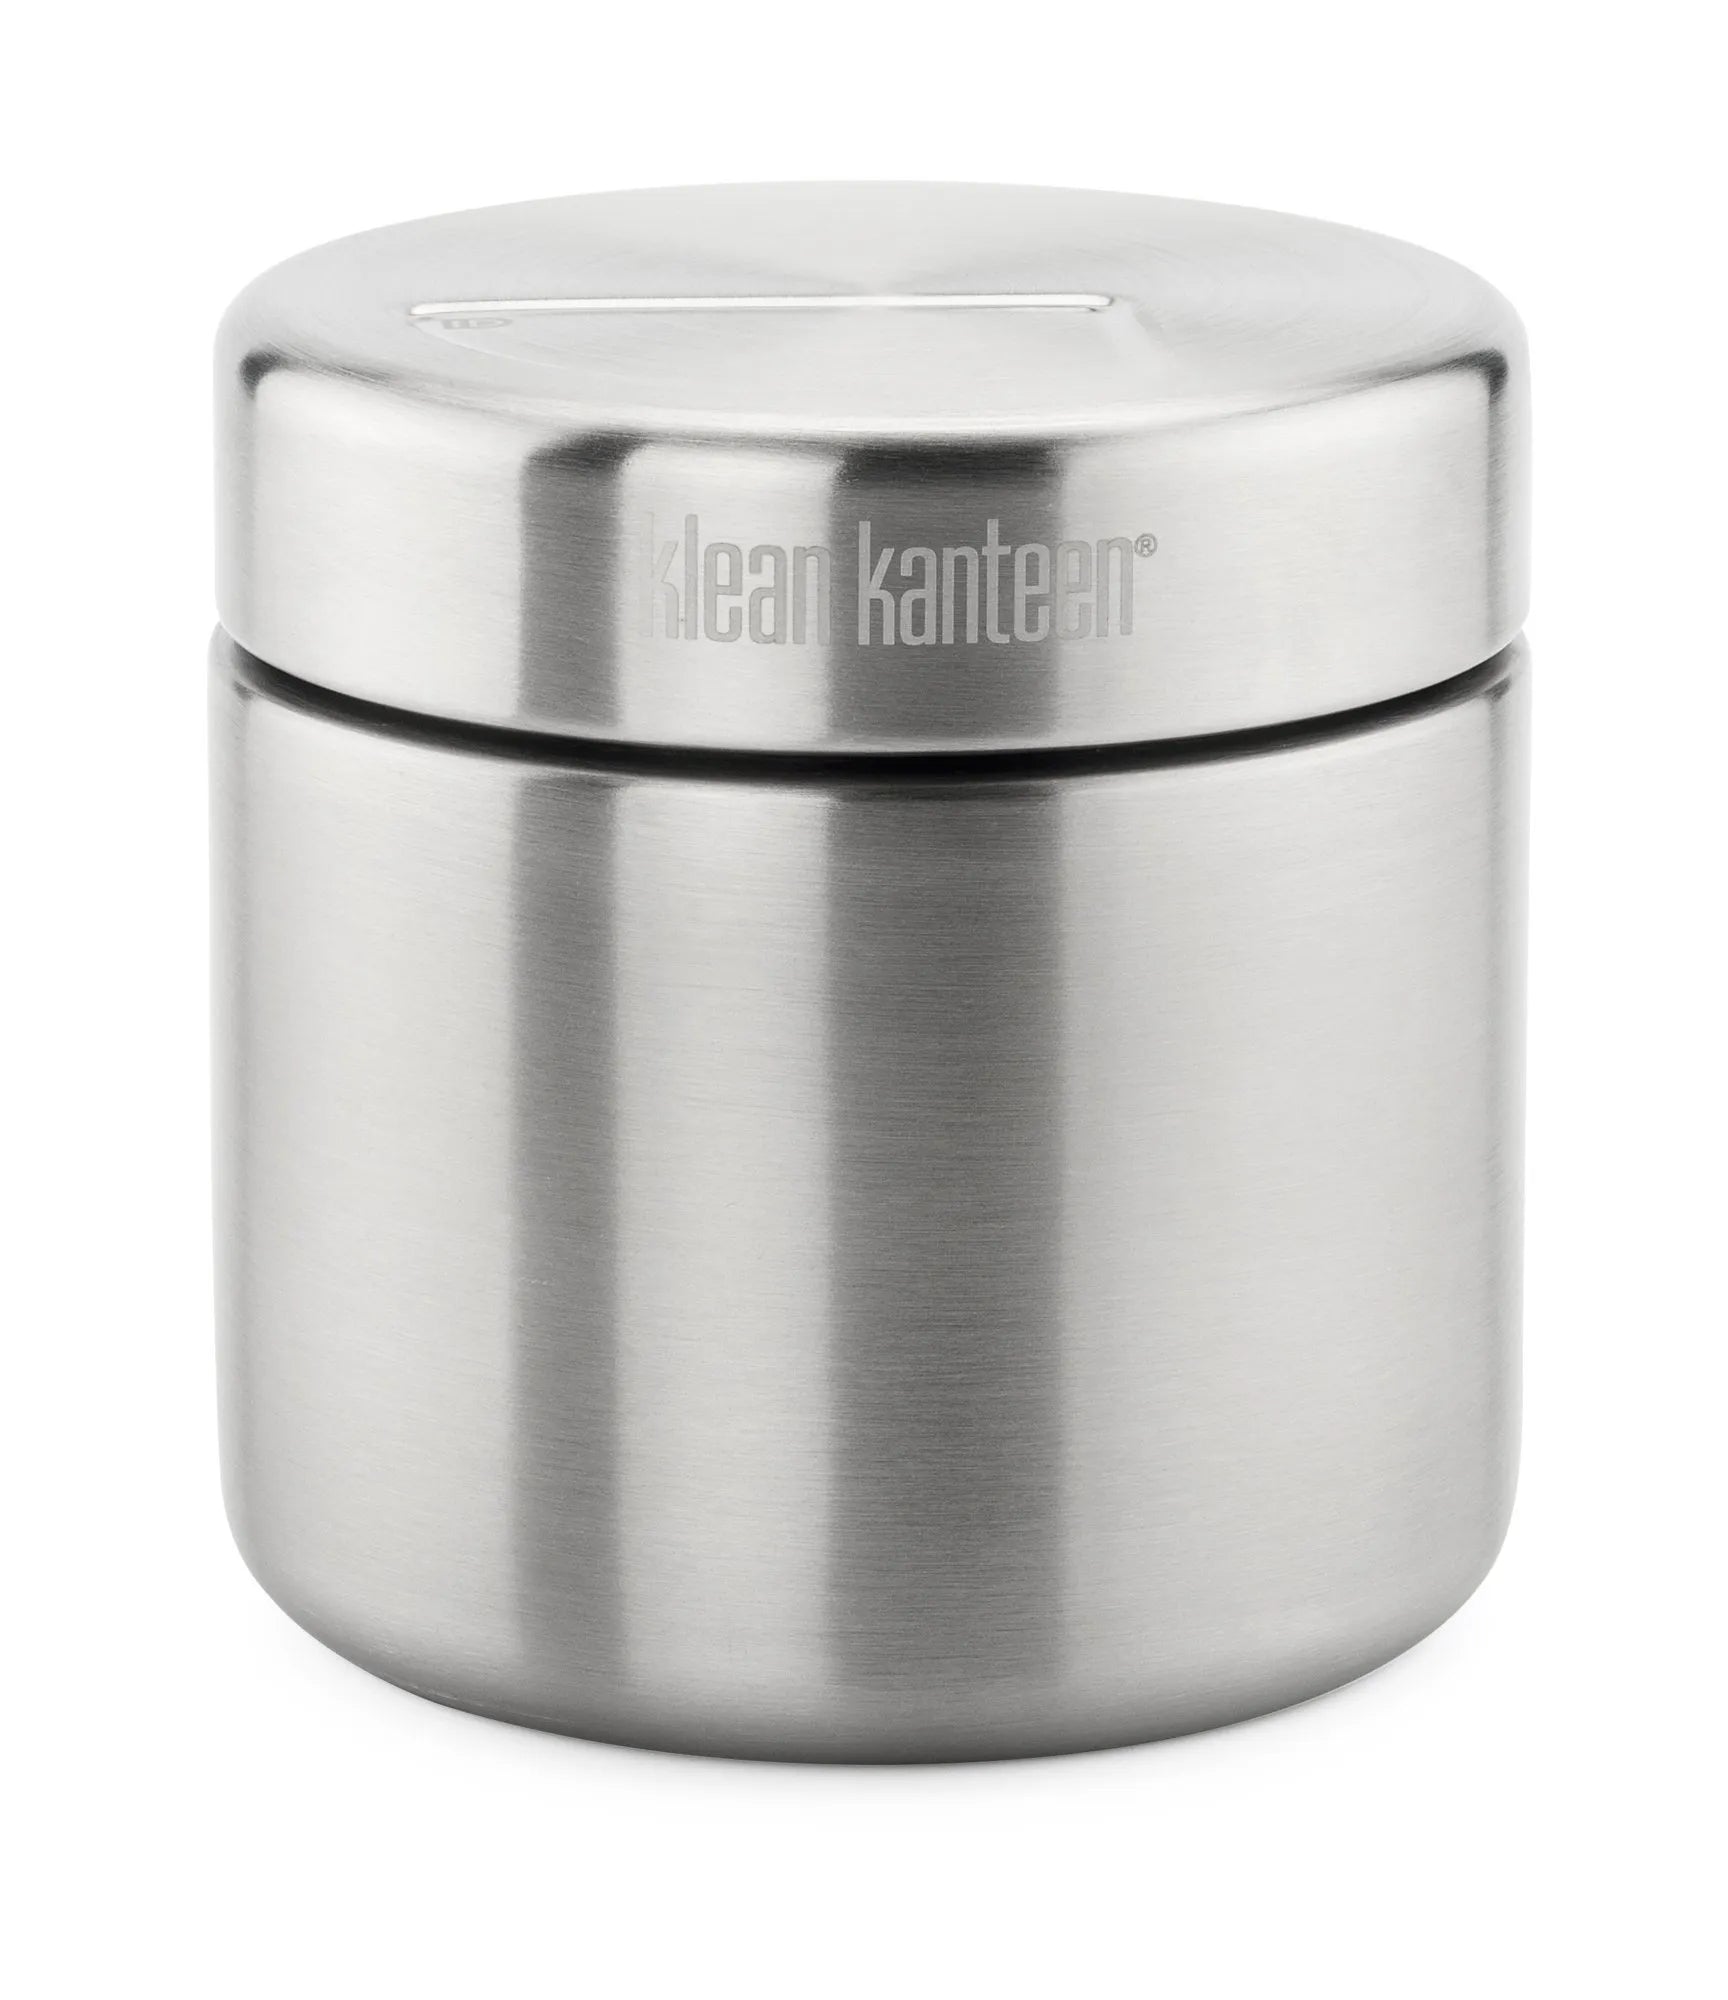 Klean Kanteen Food Canister Single-Walled